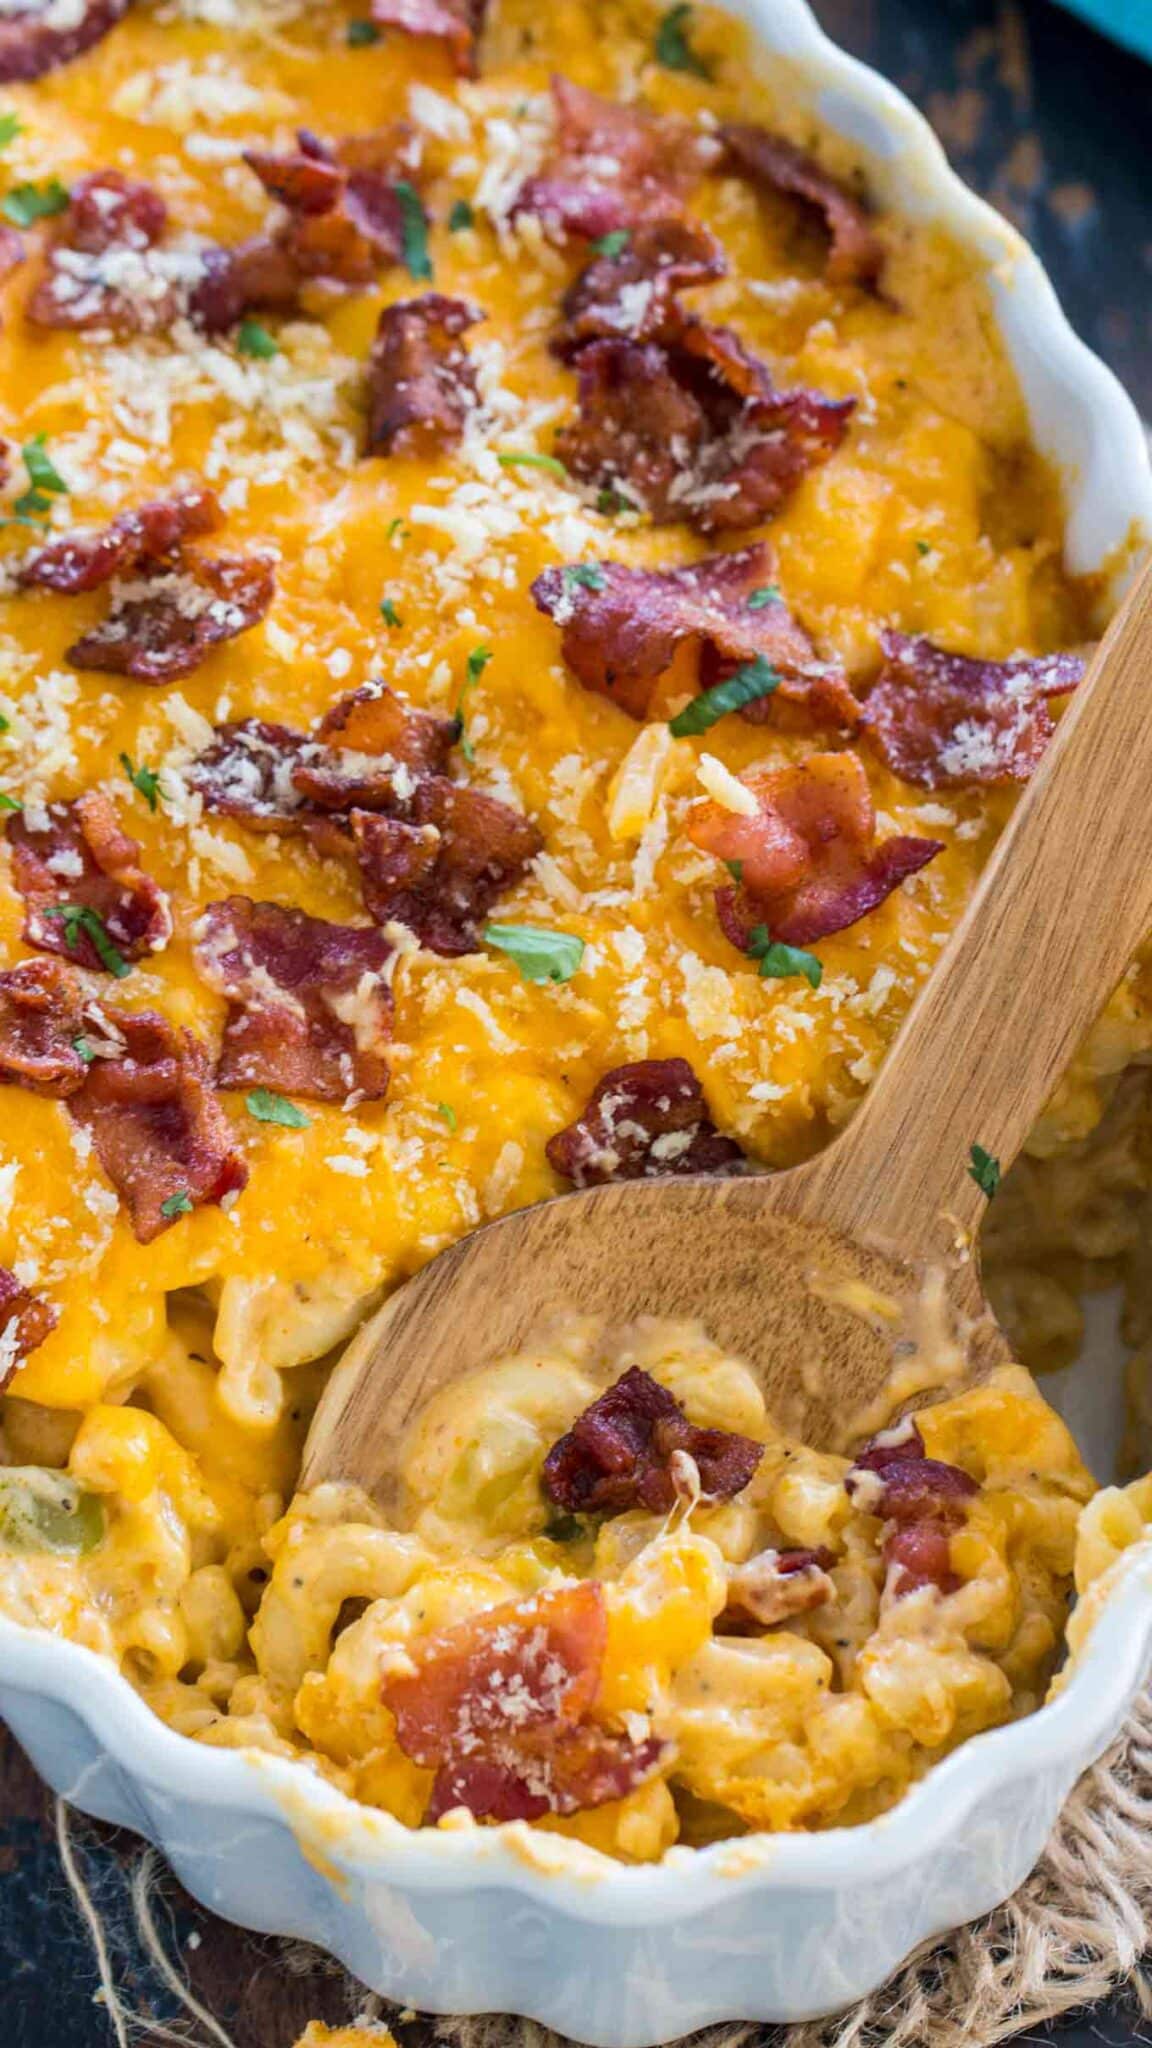 Top 10 Casserole Recipes - Sweet and Savory Meals